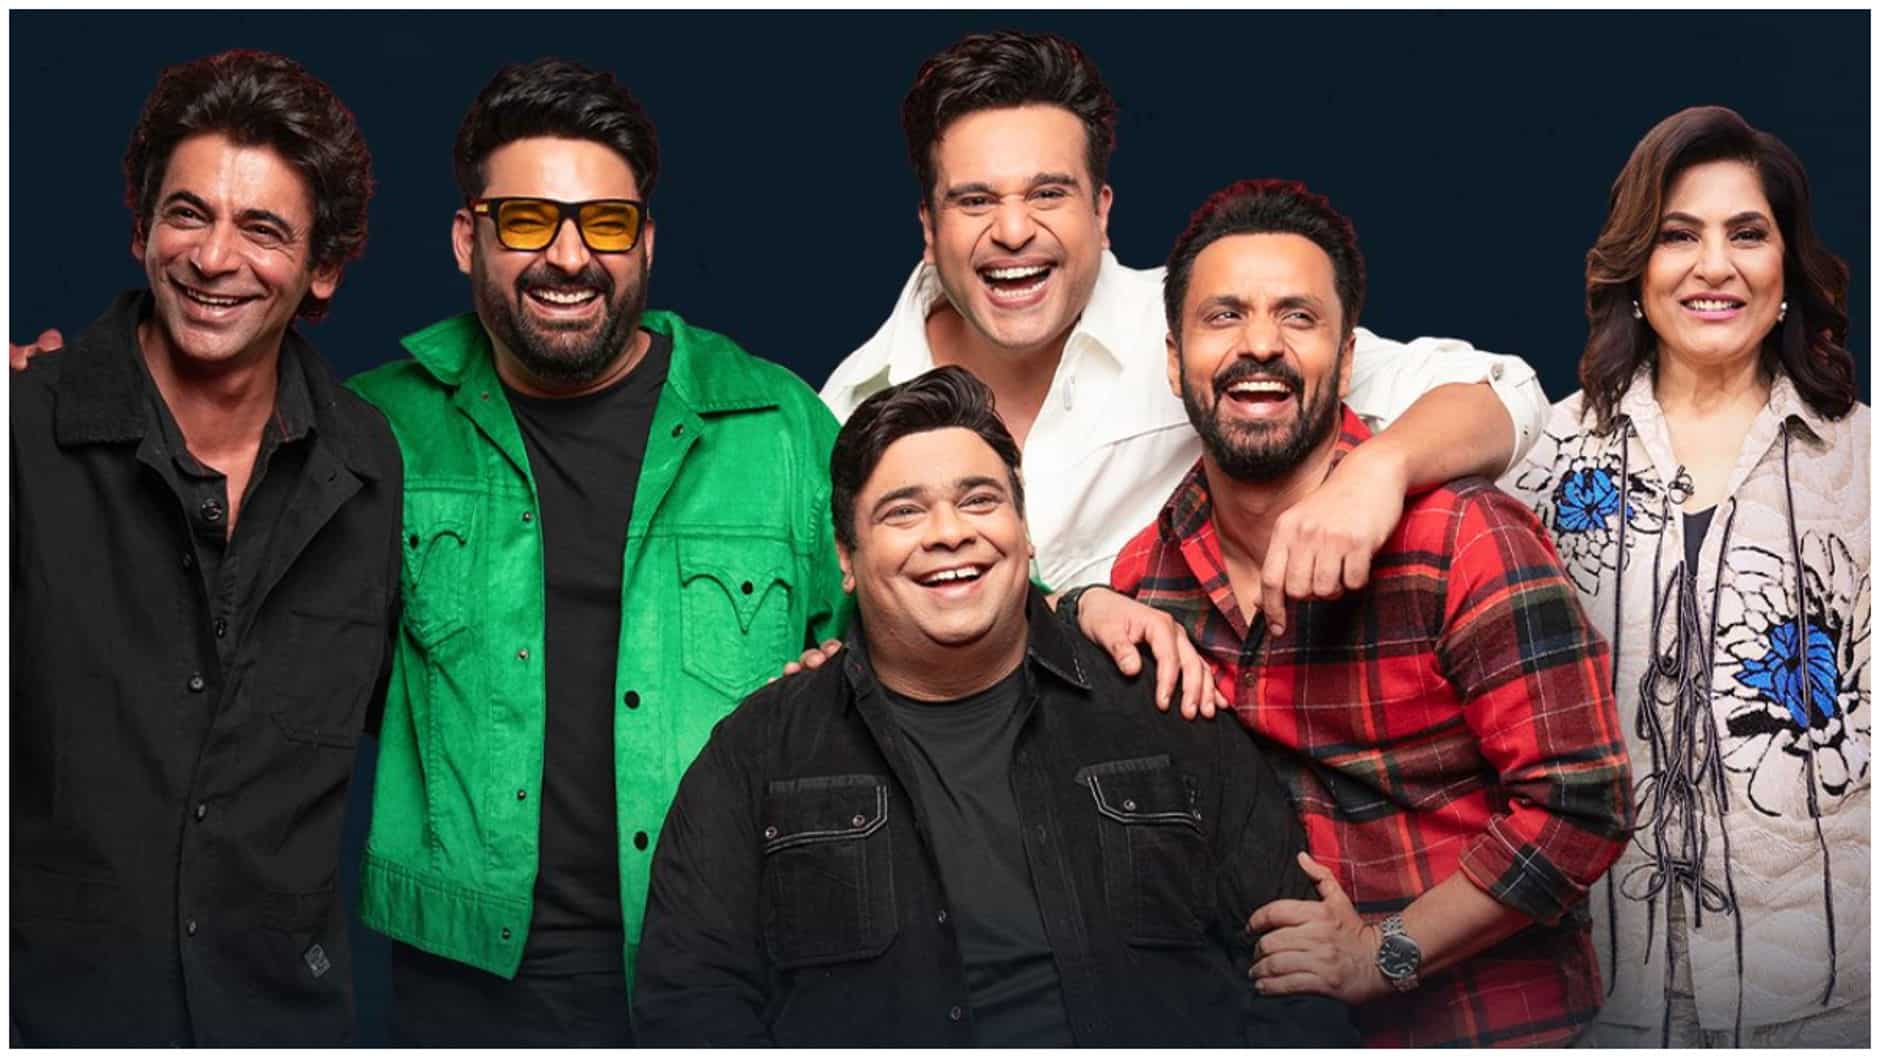 https://www.mobilemasala.com/film-gossip/The-Great-Indian-Kapil-Show-trailer-is-OUT-Kapil-Sharma-Sunil-Grover-and-others-unleash-a-laugh-riot-i226313